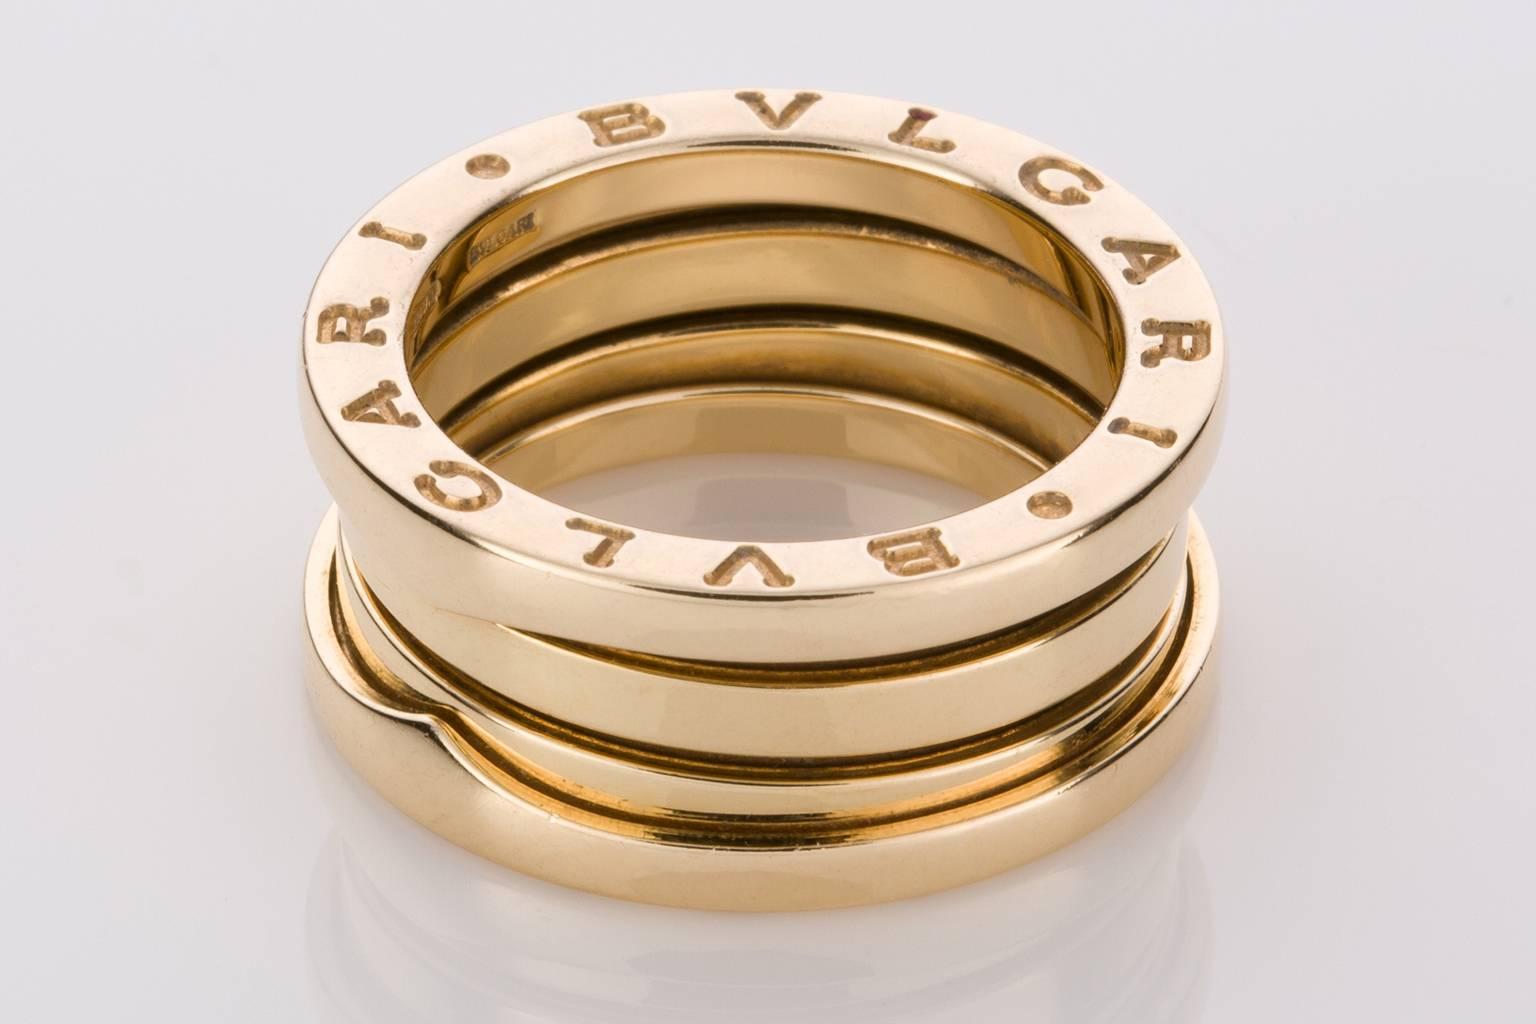 Beautiful Bulgari, this statement ring from the B Zero collection with 3 bands is a classic design. Made with a slight spring movement between the bands it is wonderfully comfortable to wear and sits nicely on the finger. Simple and elegant but also